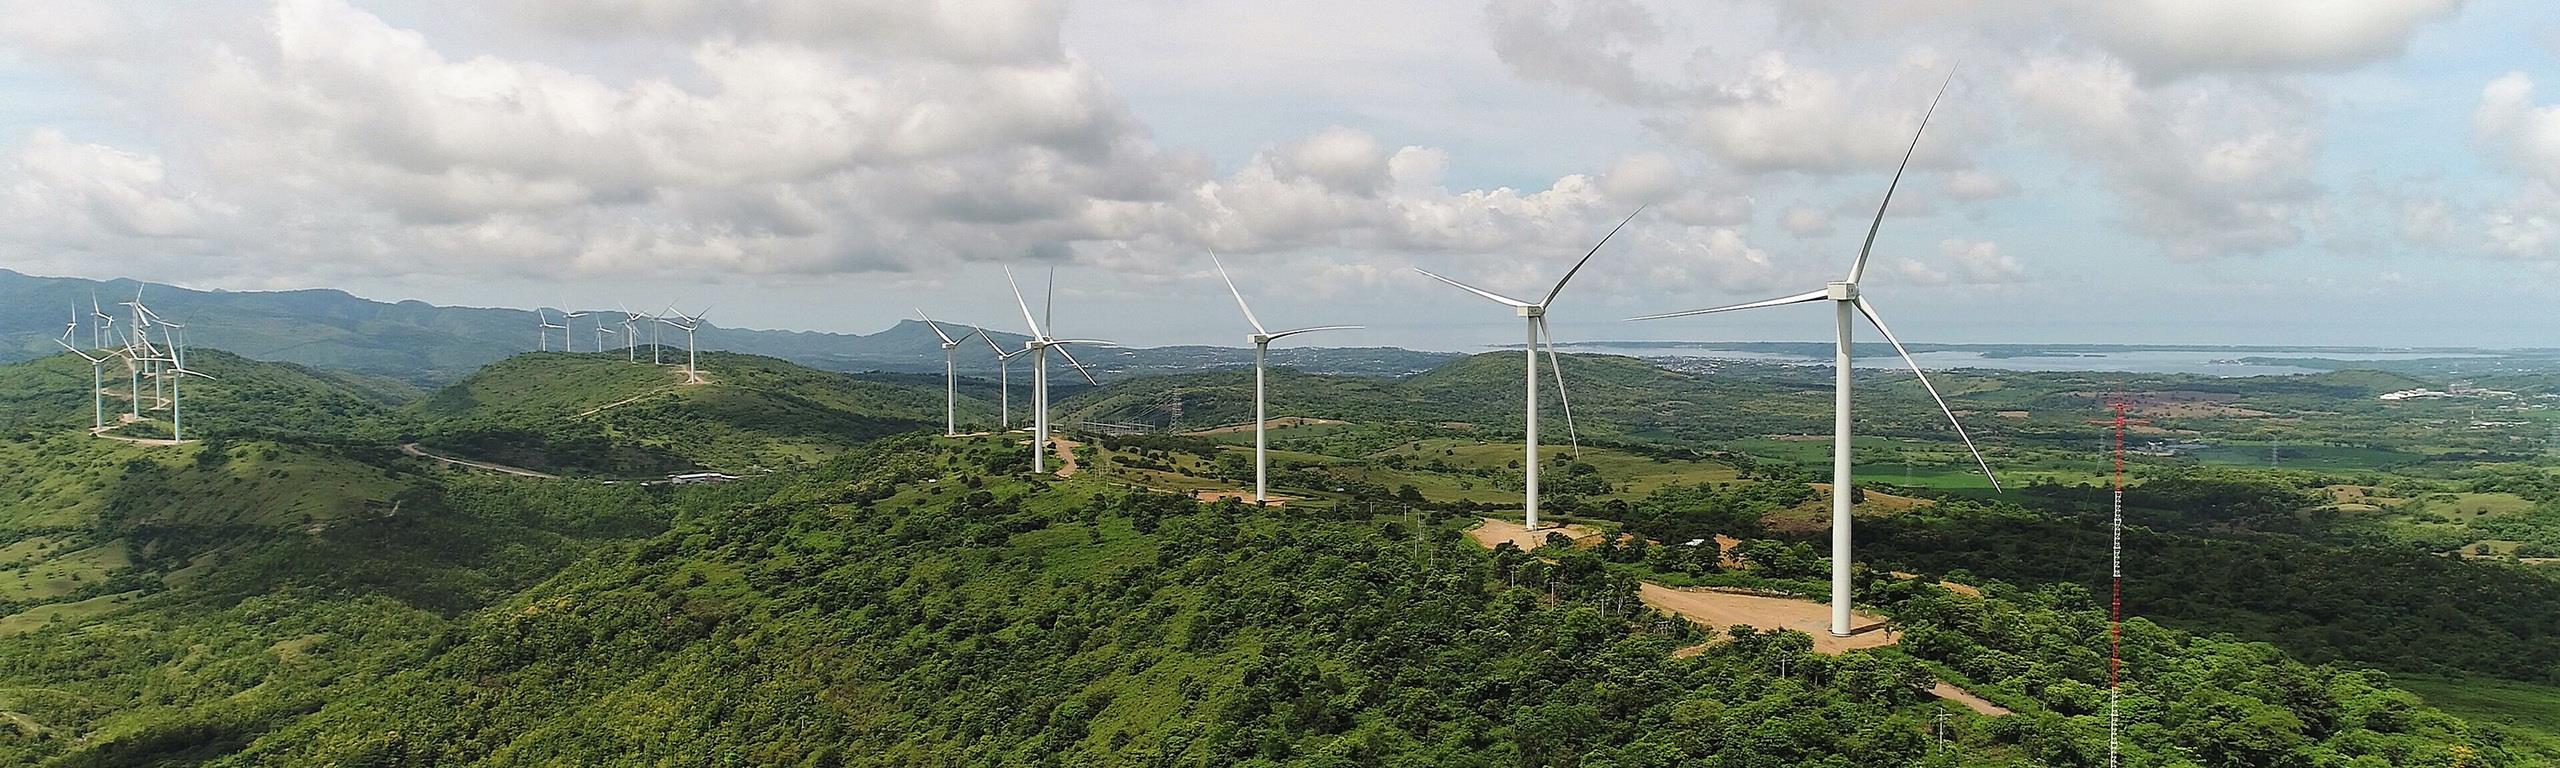 An aerial view of the Sidrap wind farm in Indonesia